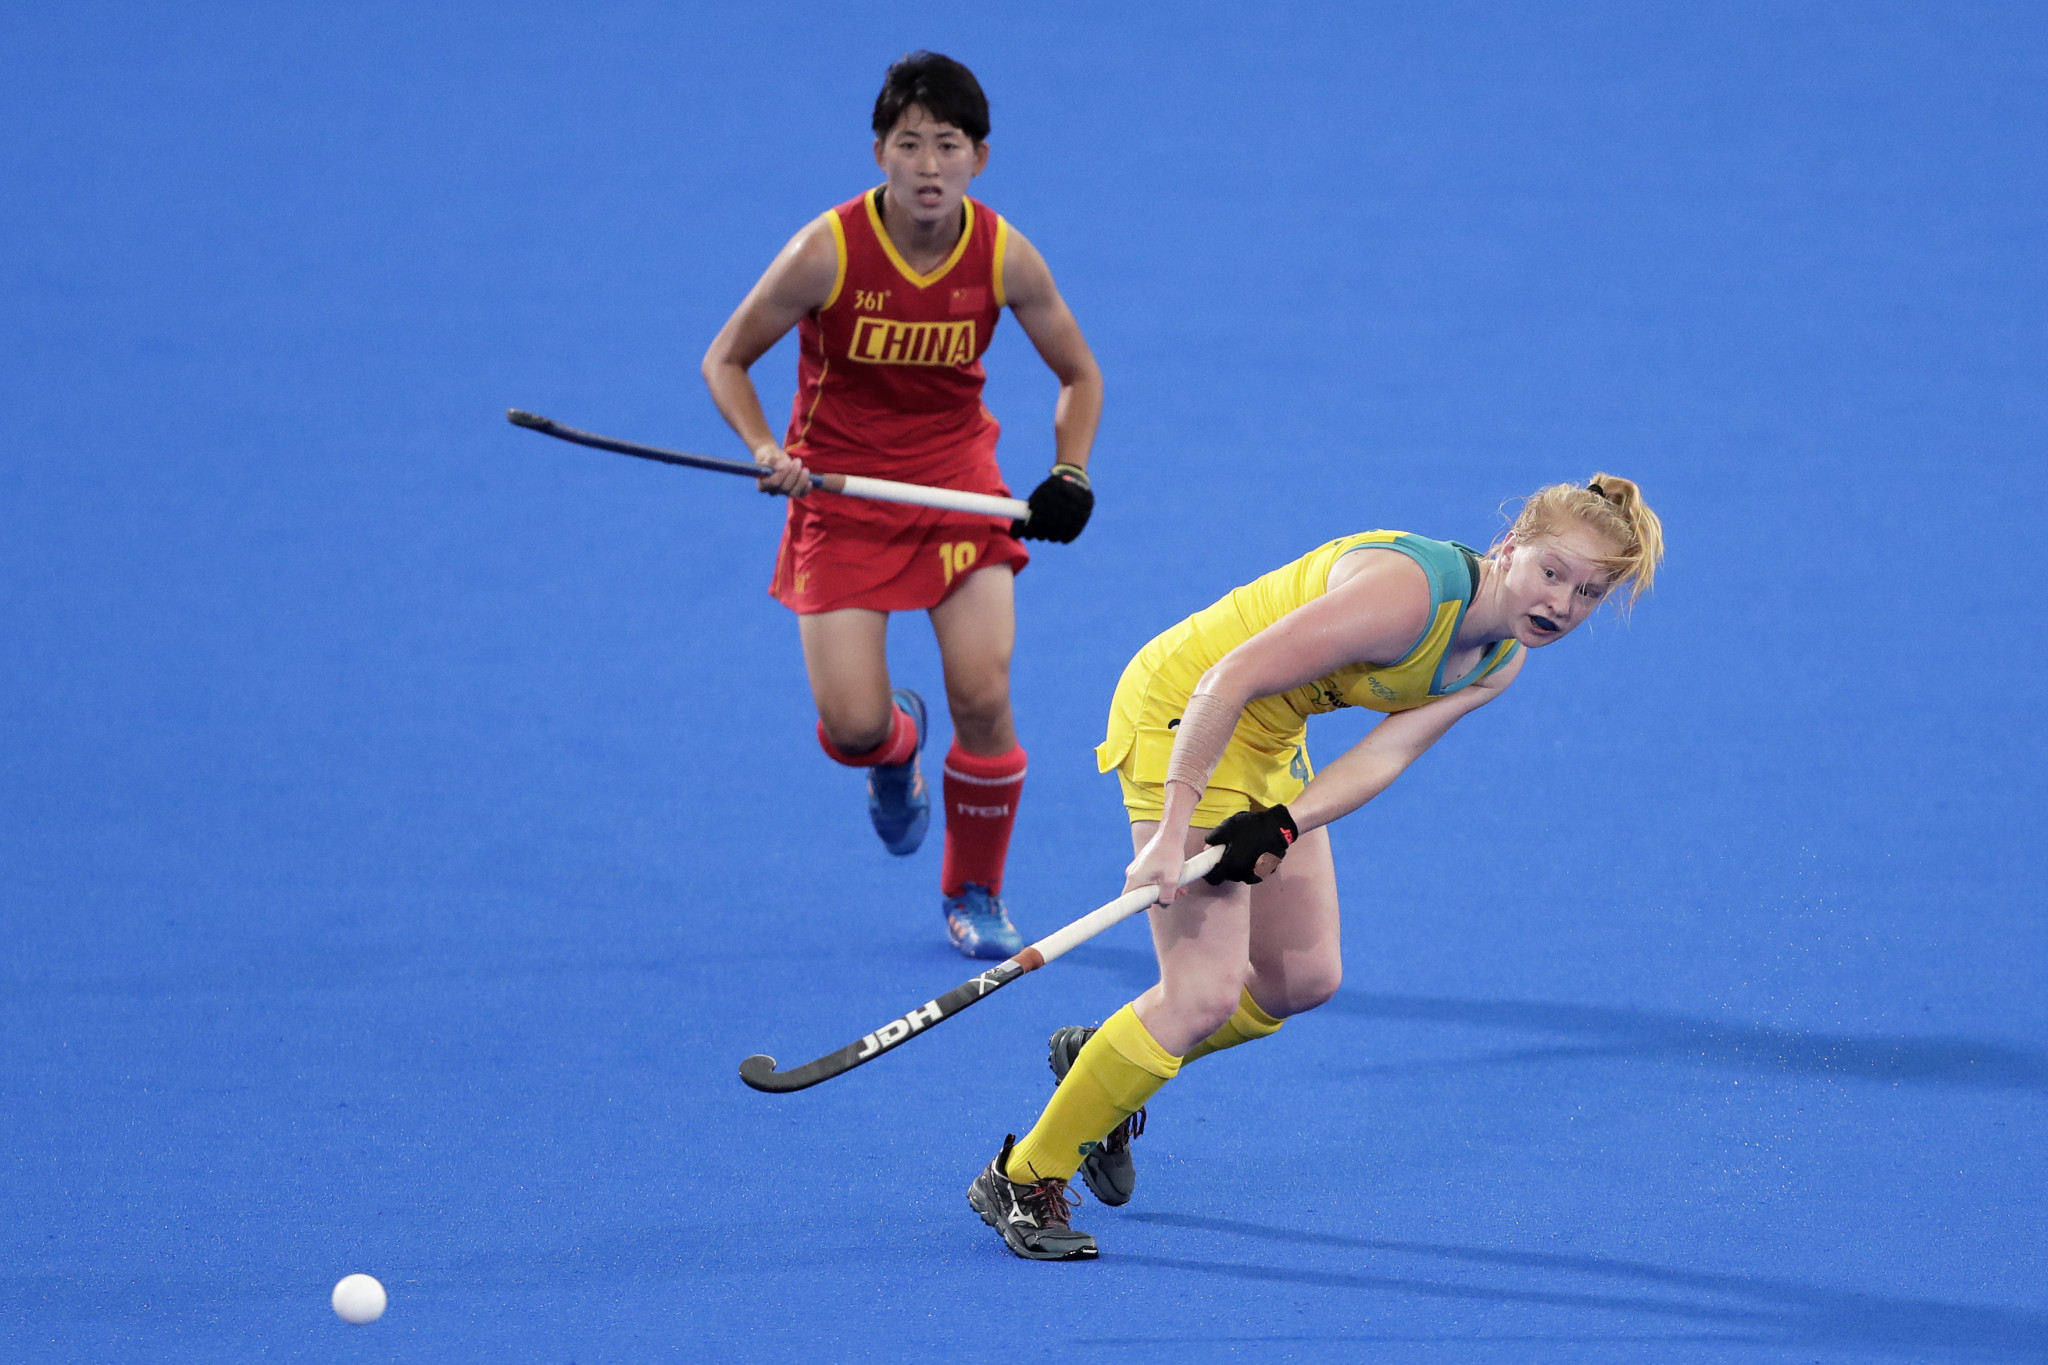 Australia and China were set to face off in the FIH Hockey Pro League, but the fixture has been cancelled due to the threat of disease ©Getty Images